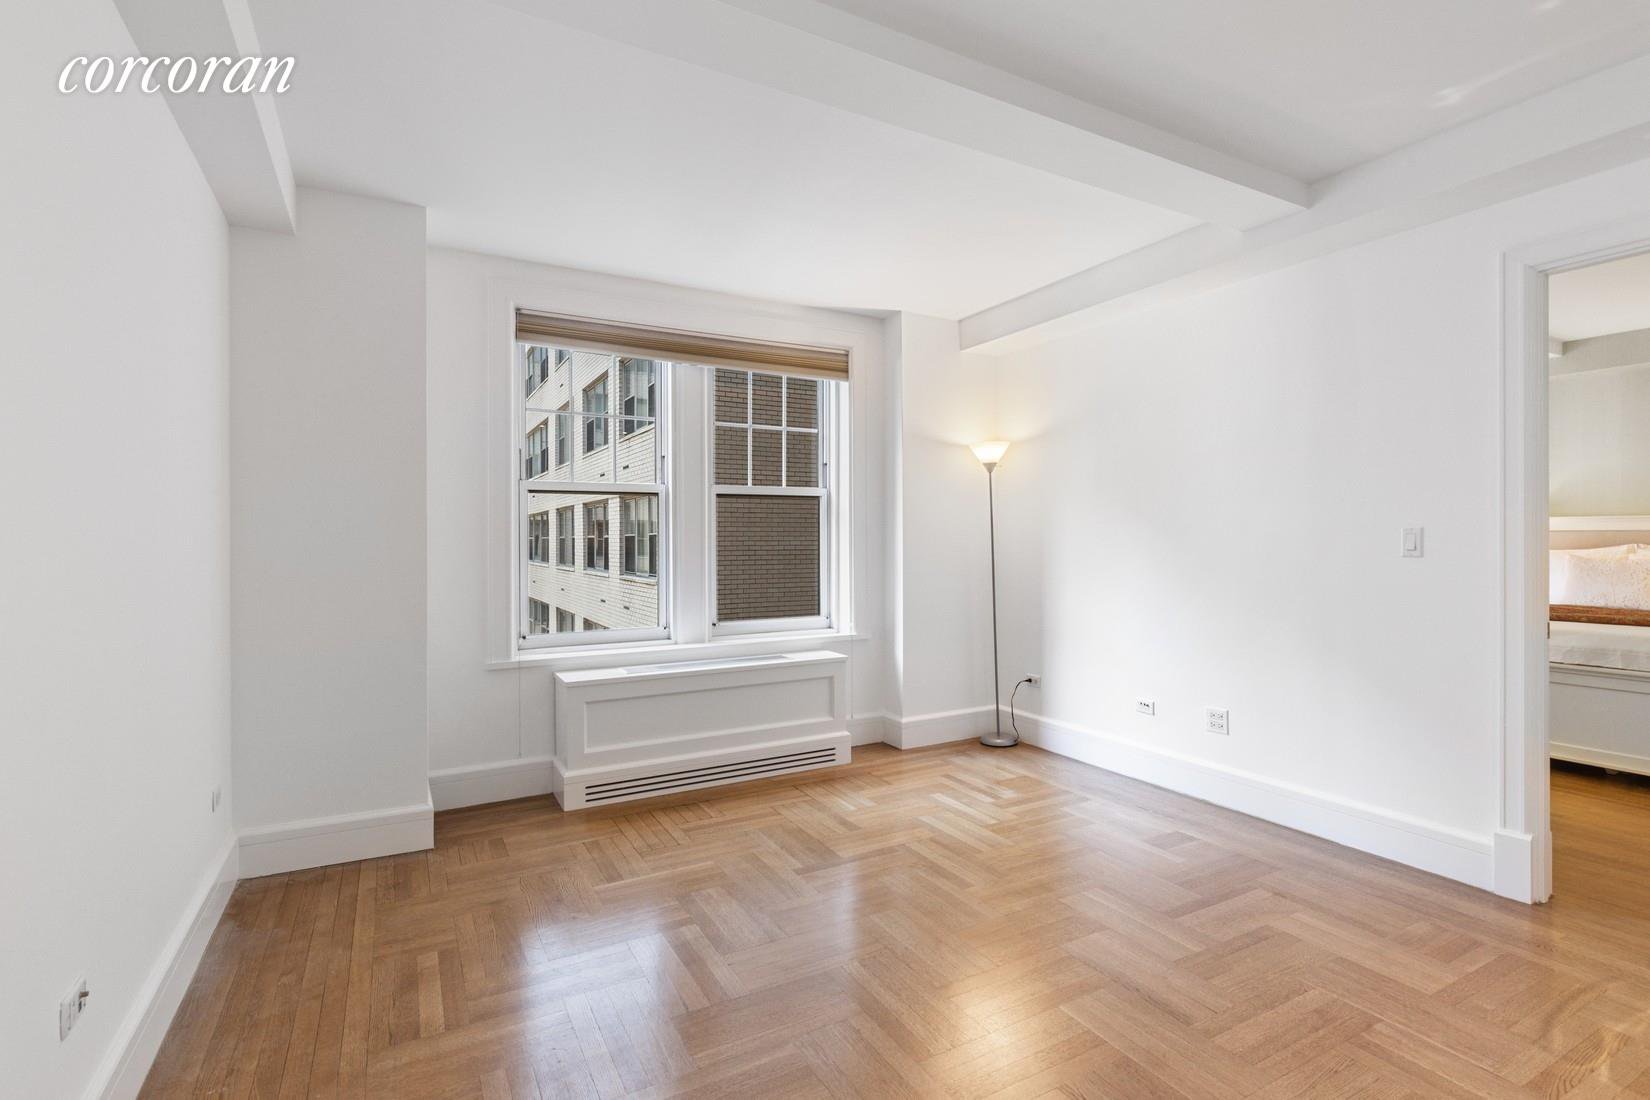 27 W 72ND ST, NEW YORK, NY 10023 for Sale | Condo.com™.